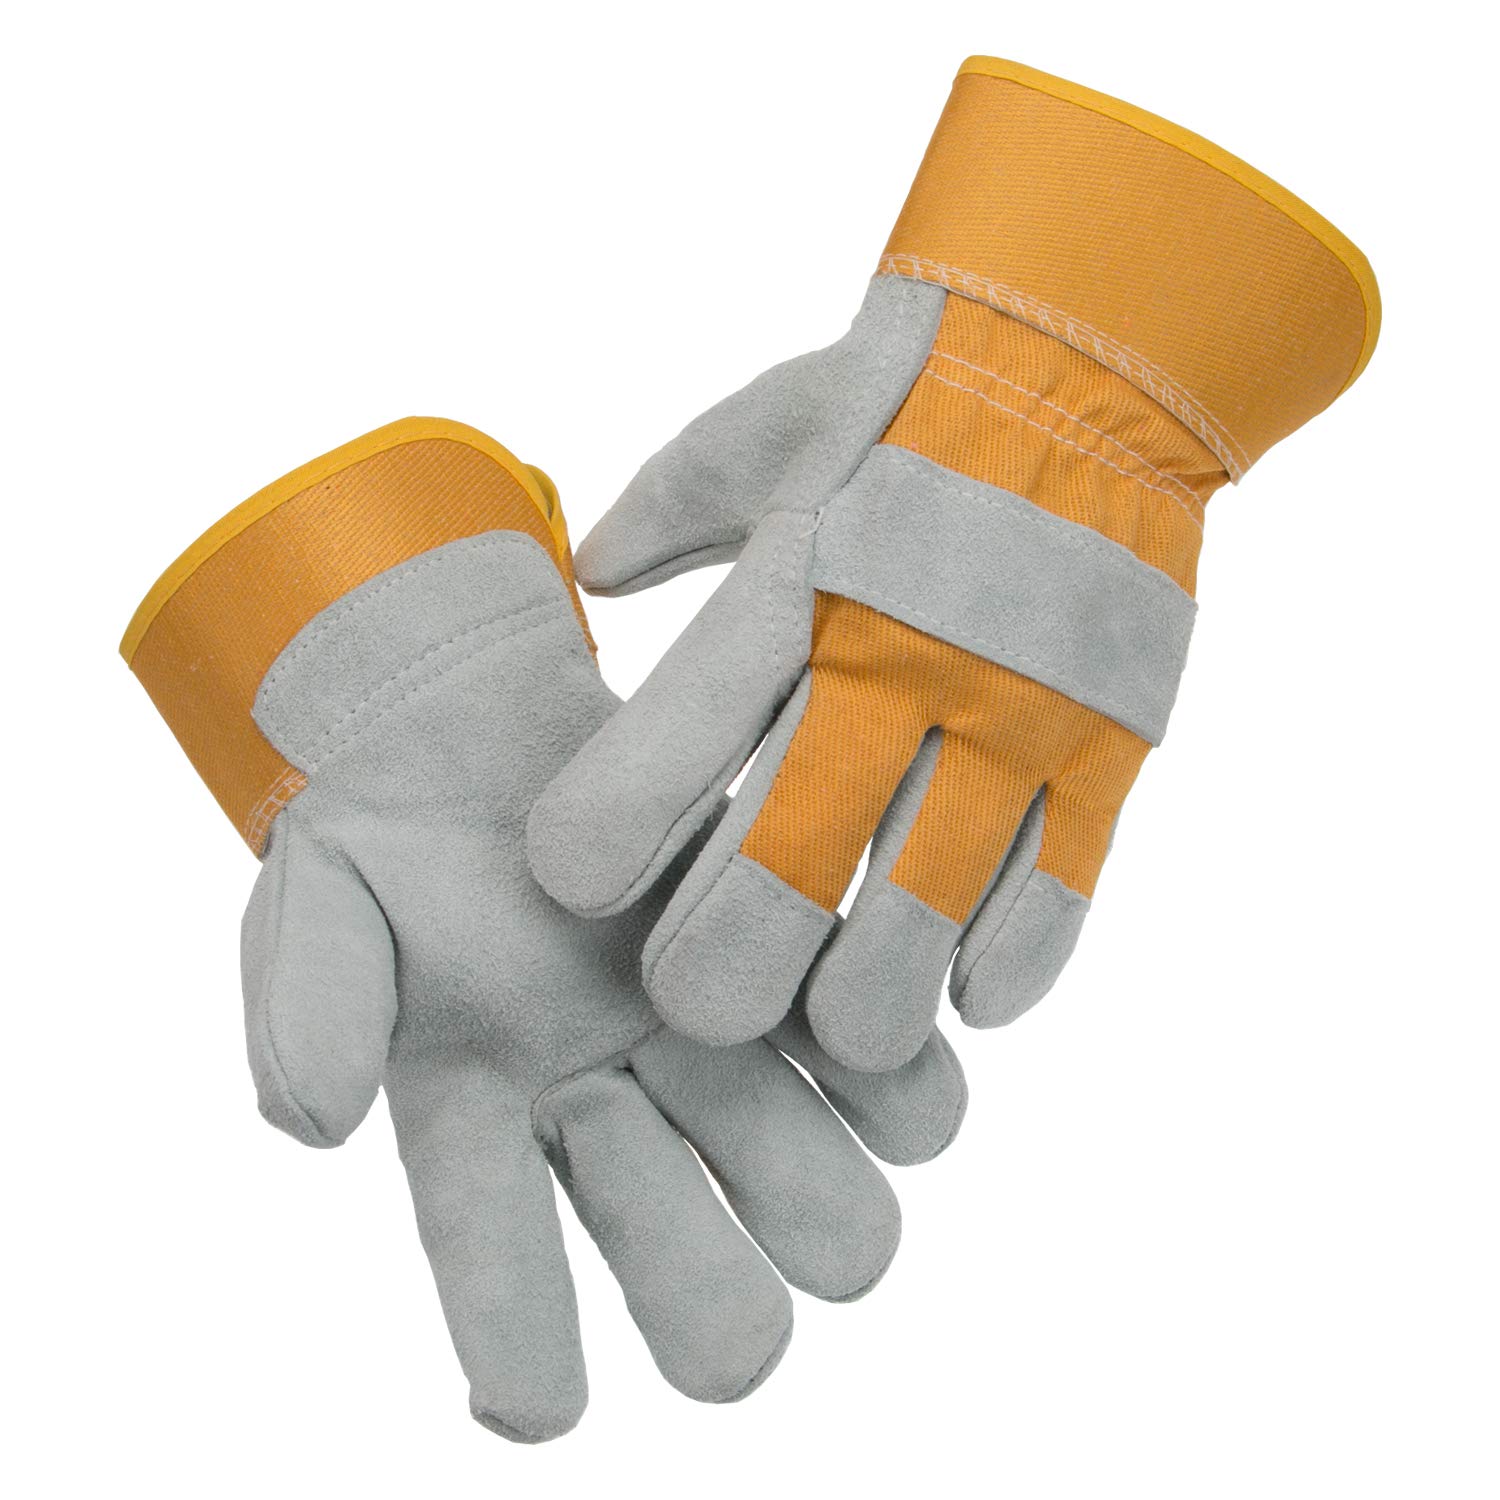 Contrast Leather Gloves produced by Crescent Leather Products Ltd